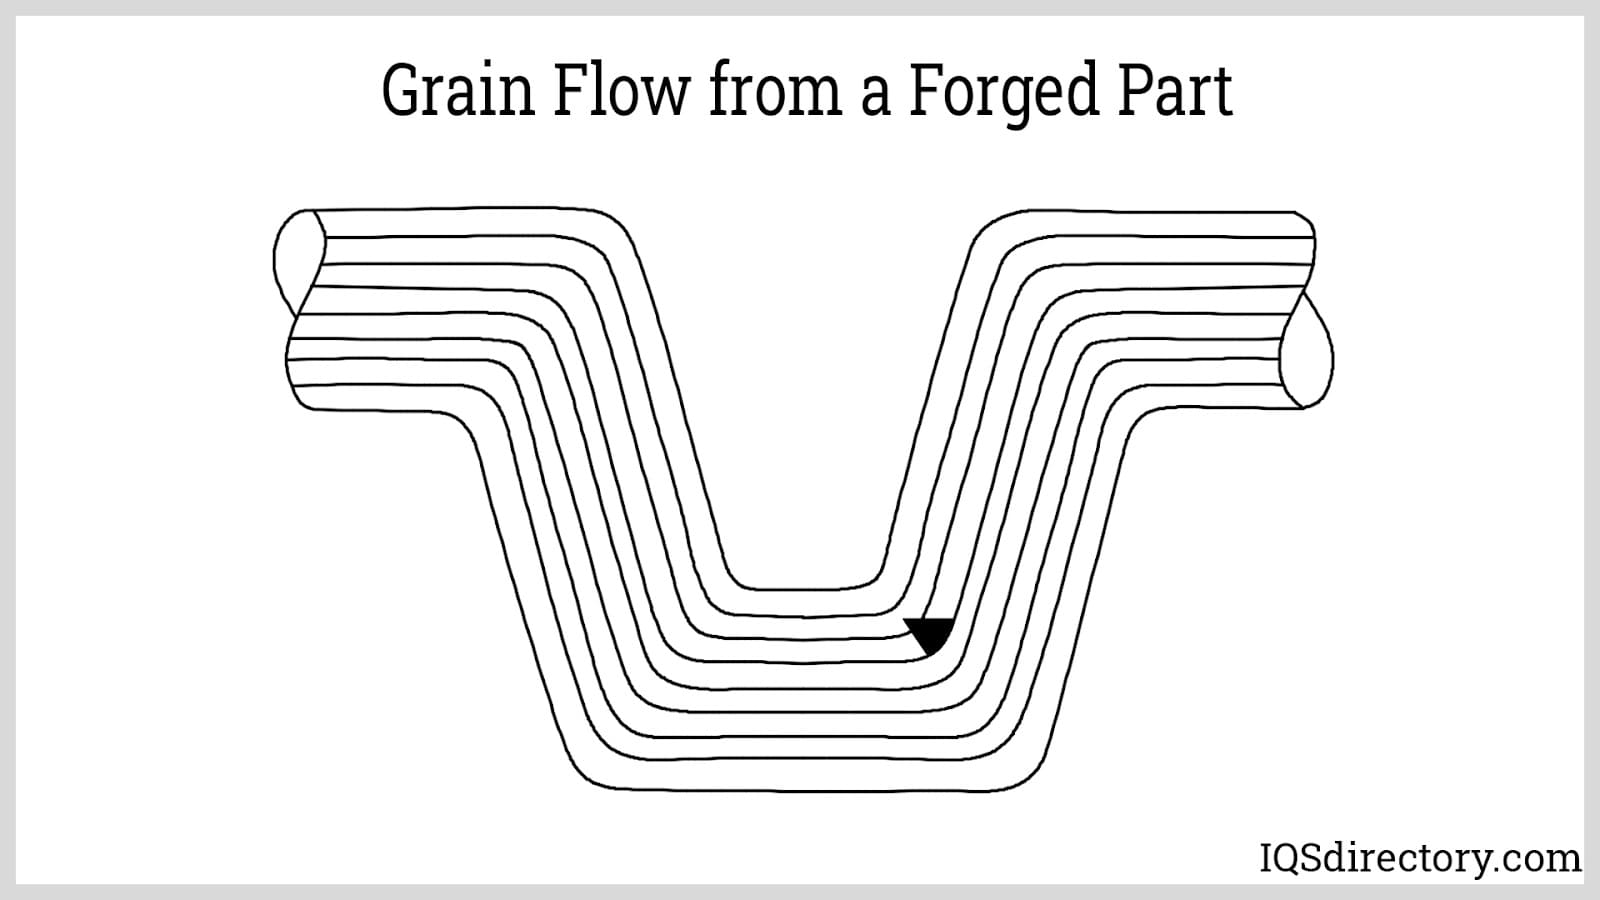 Grain Flow from a Forged Part